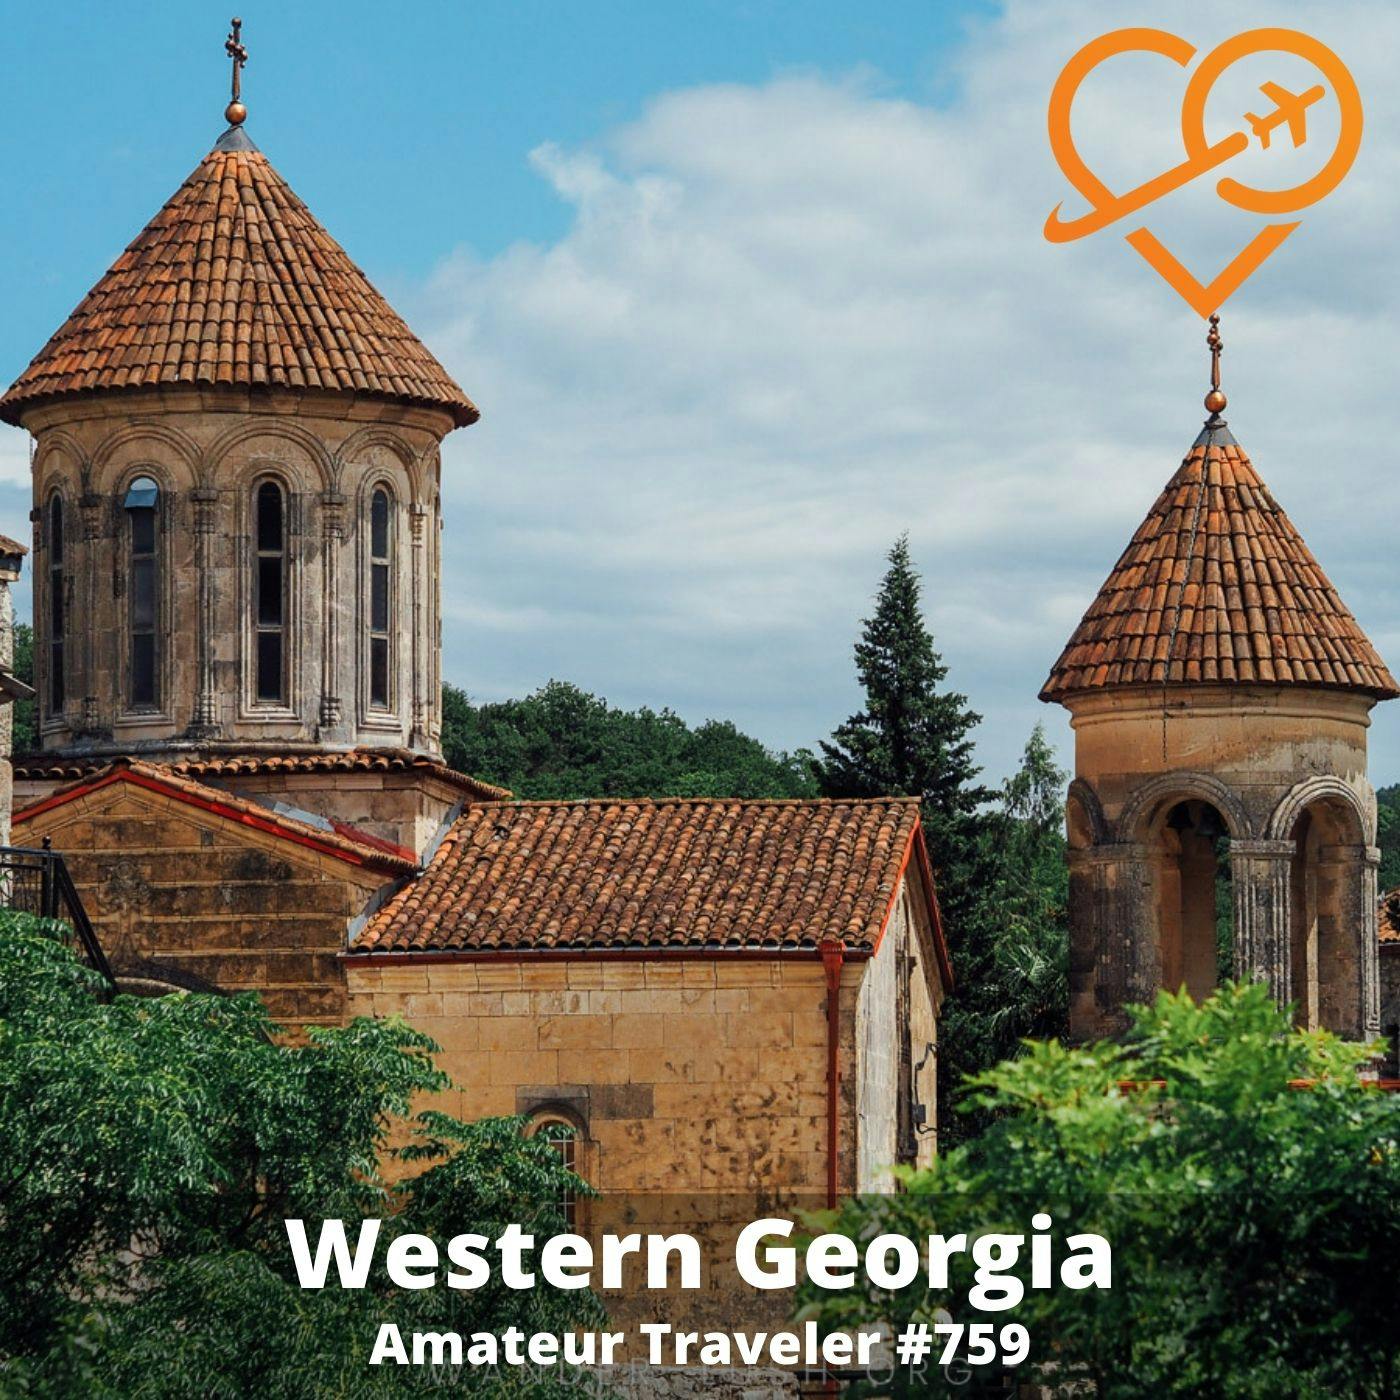 AT$759 - Travel to Western Georgia (the country)